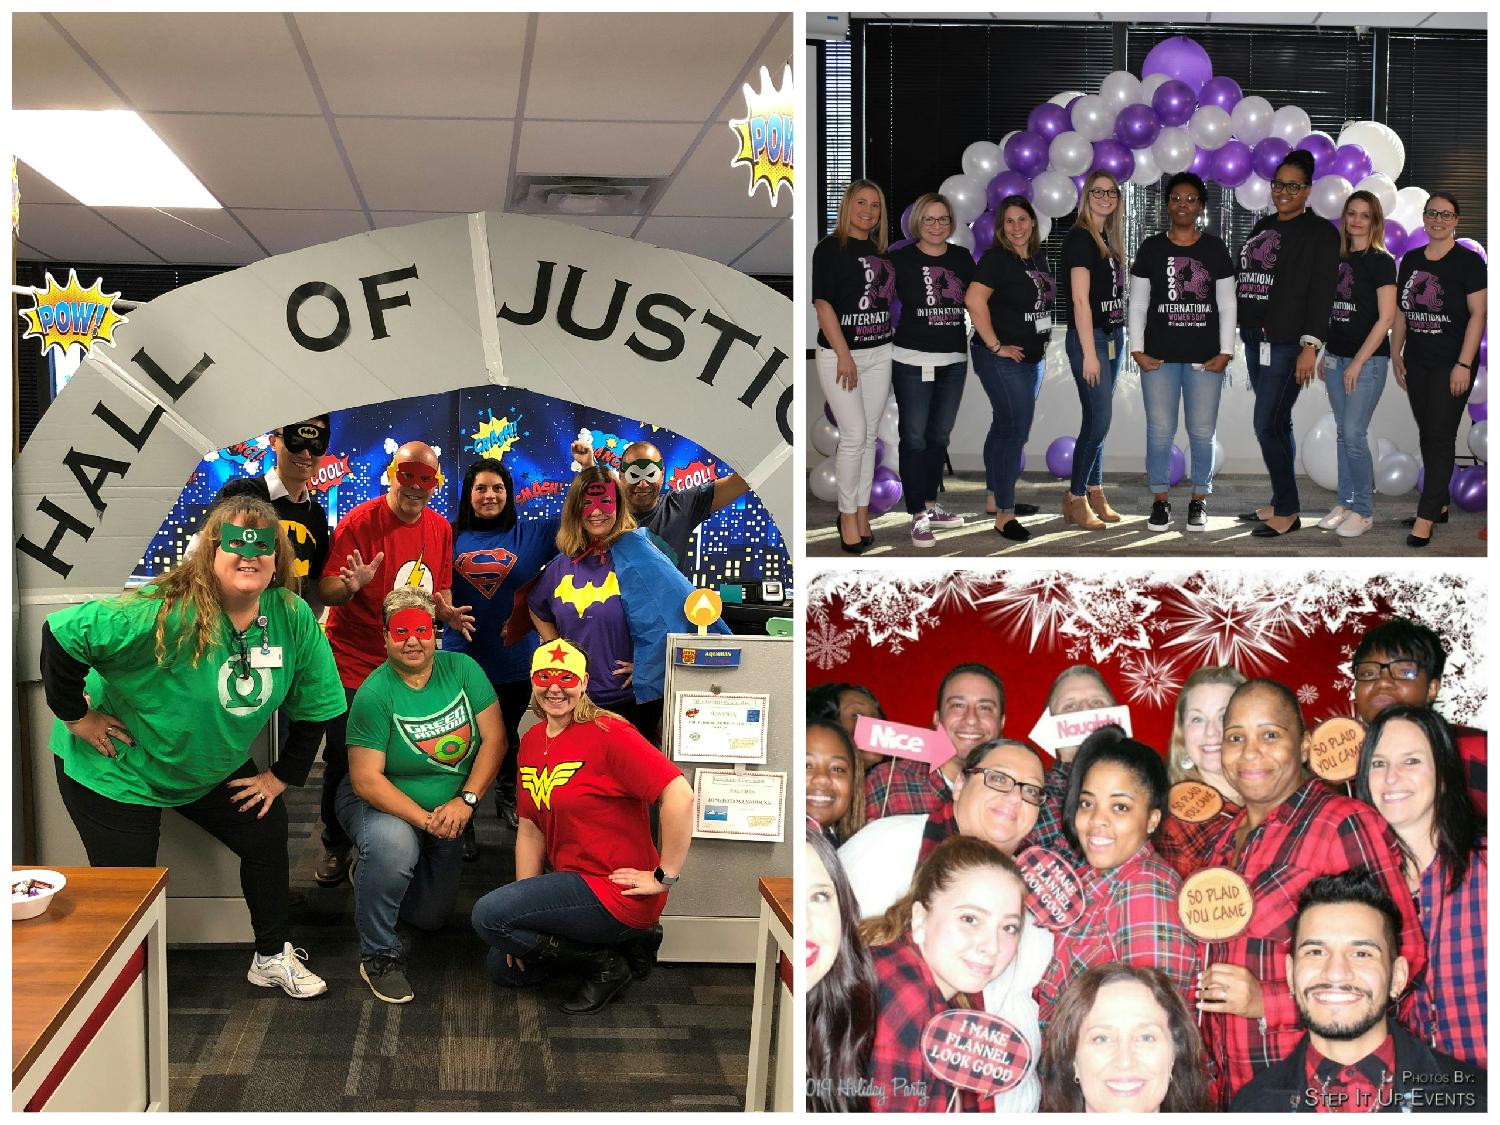 Just a few of the many employee events held at Extensis